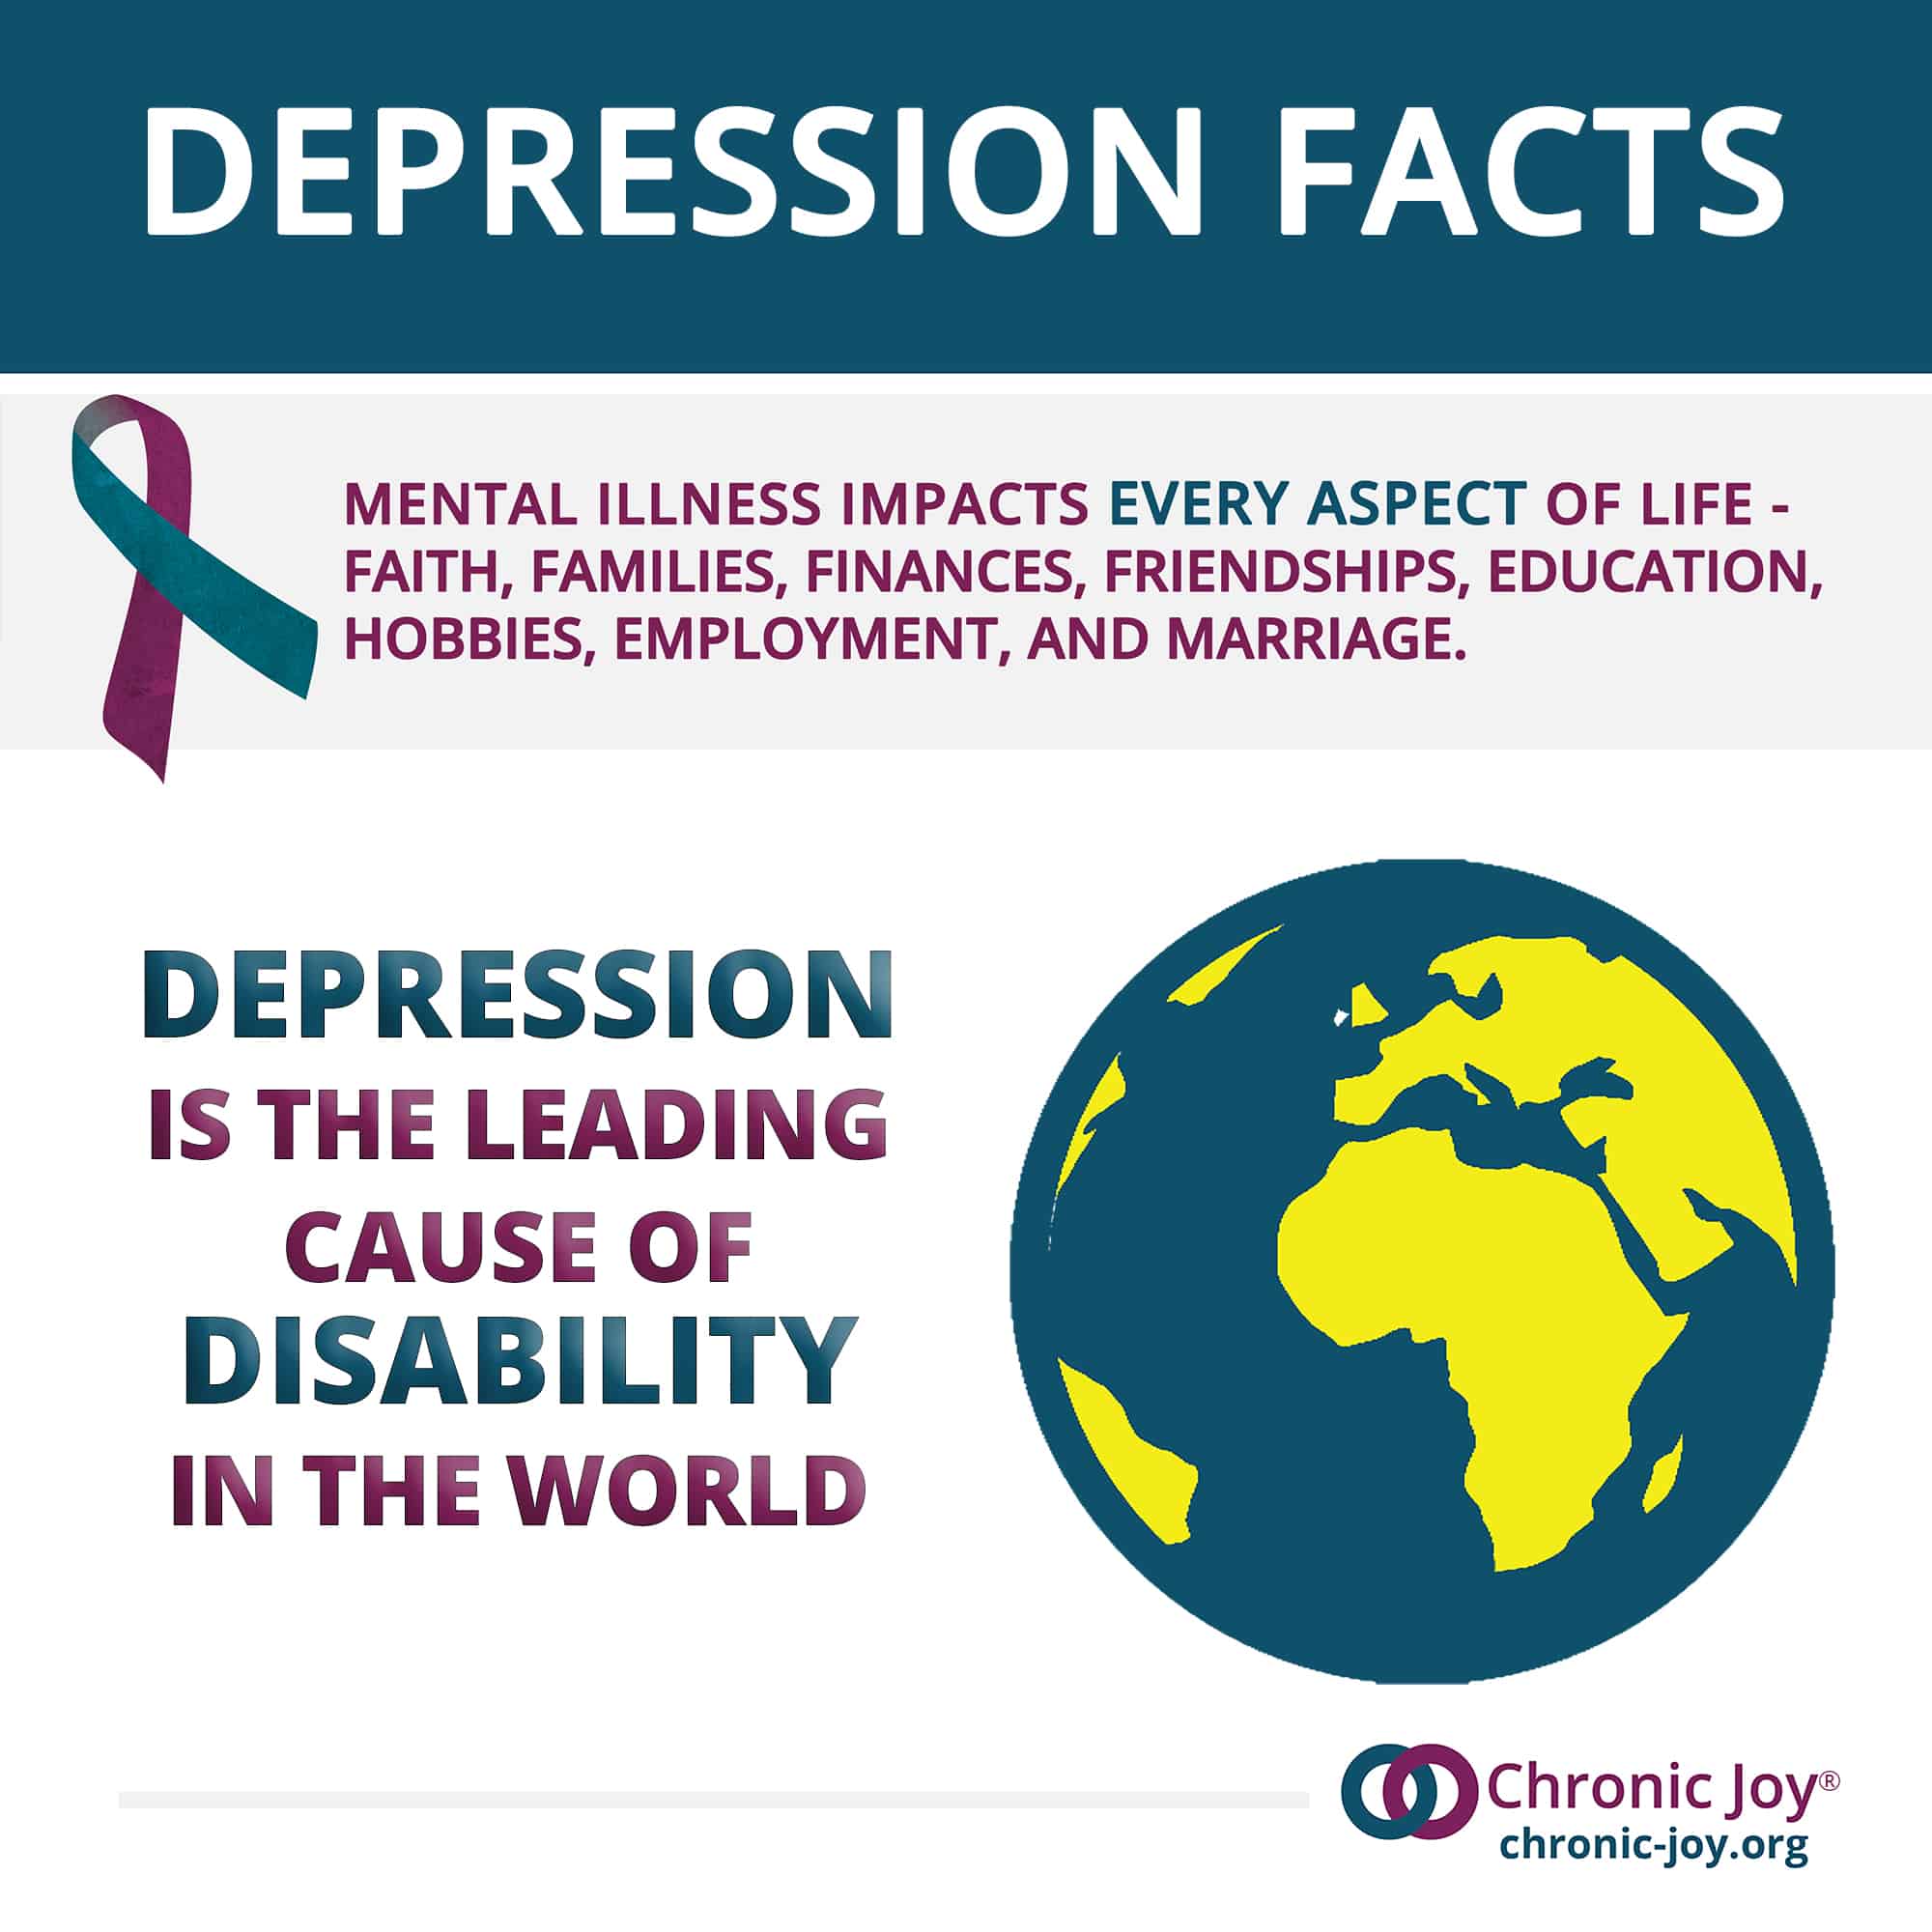 Depression is the leading cause of disability in the world.